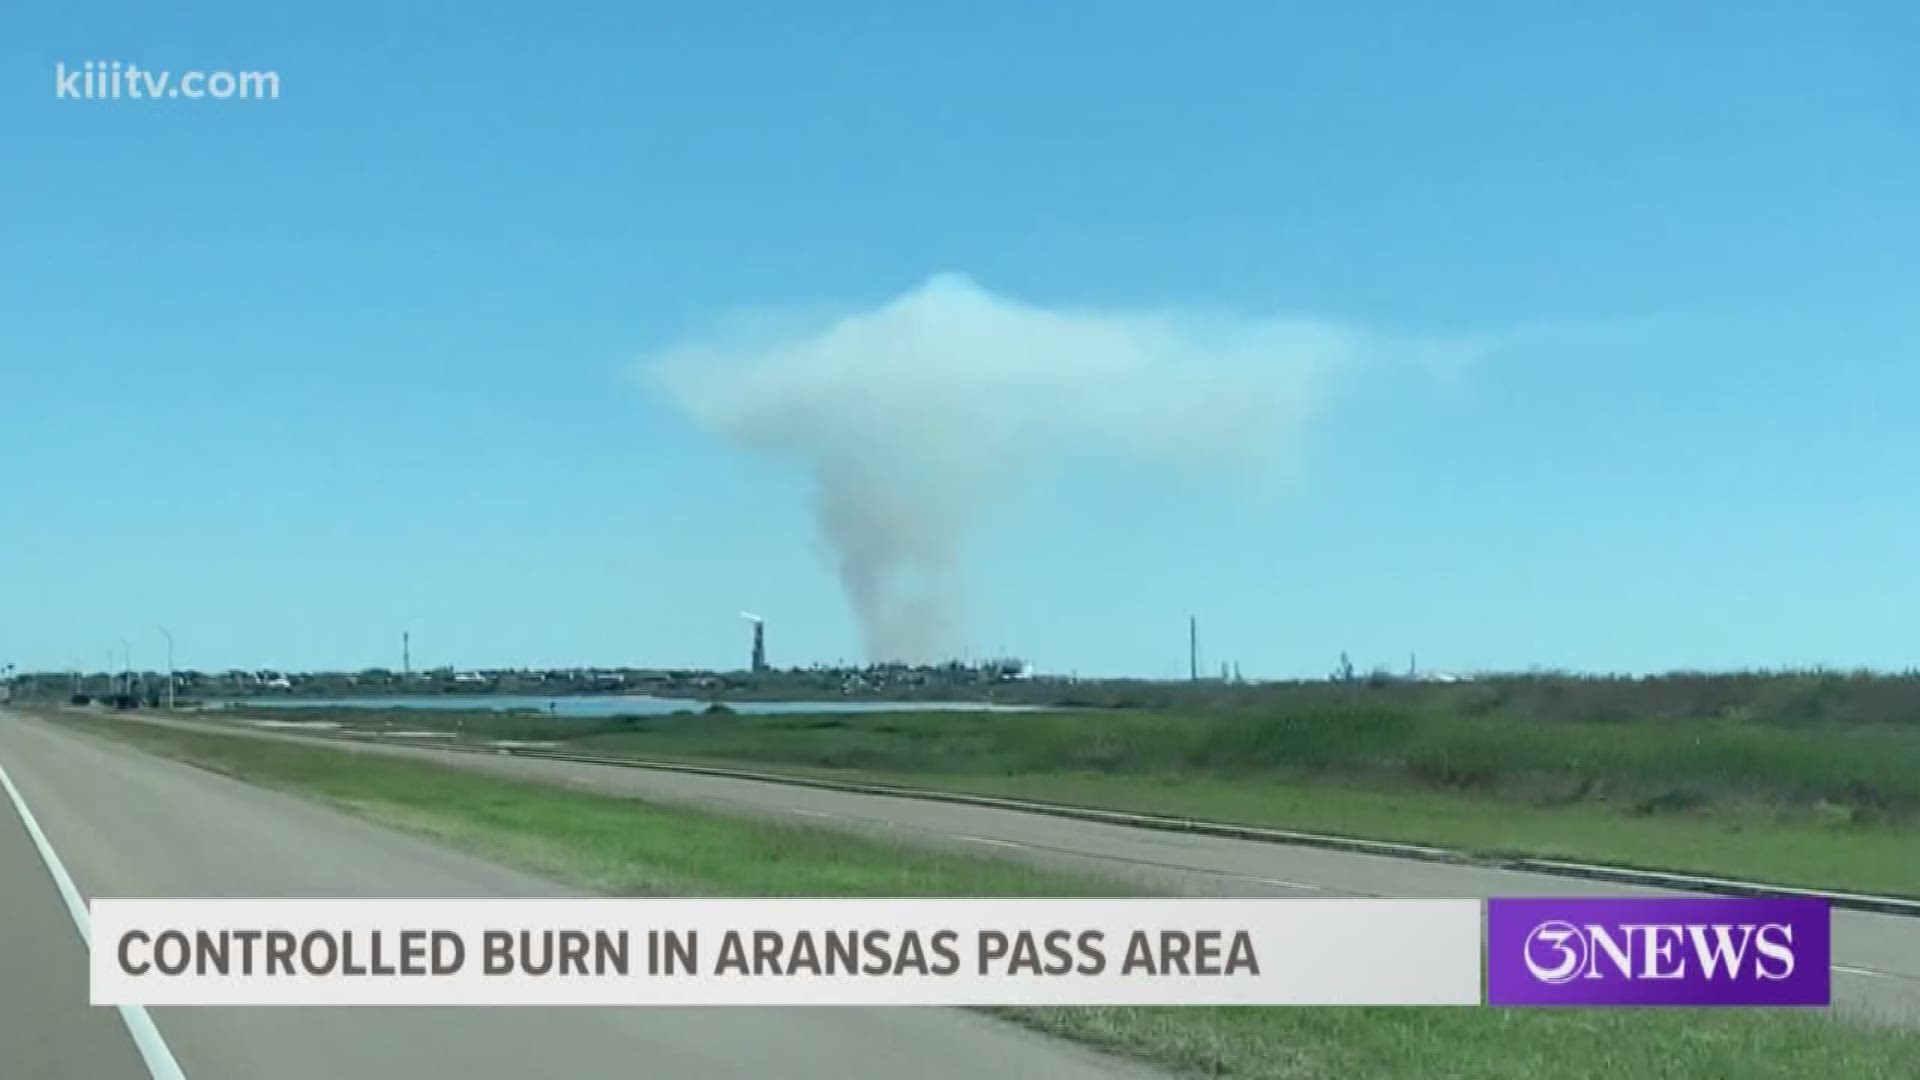 According to their Facebook post, the burn will be at 1,000 acres of land between F-M 1069 and Highway 35.